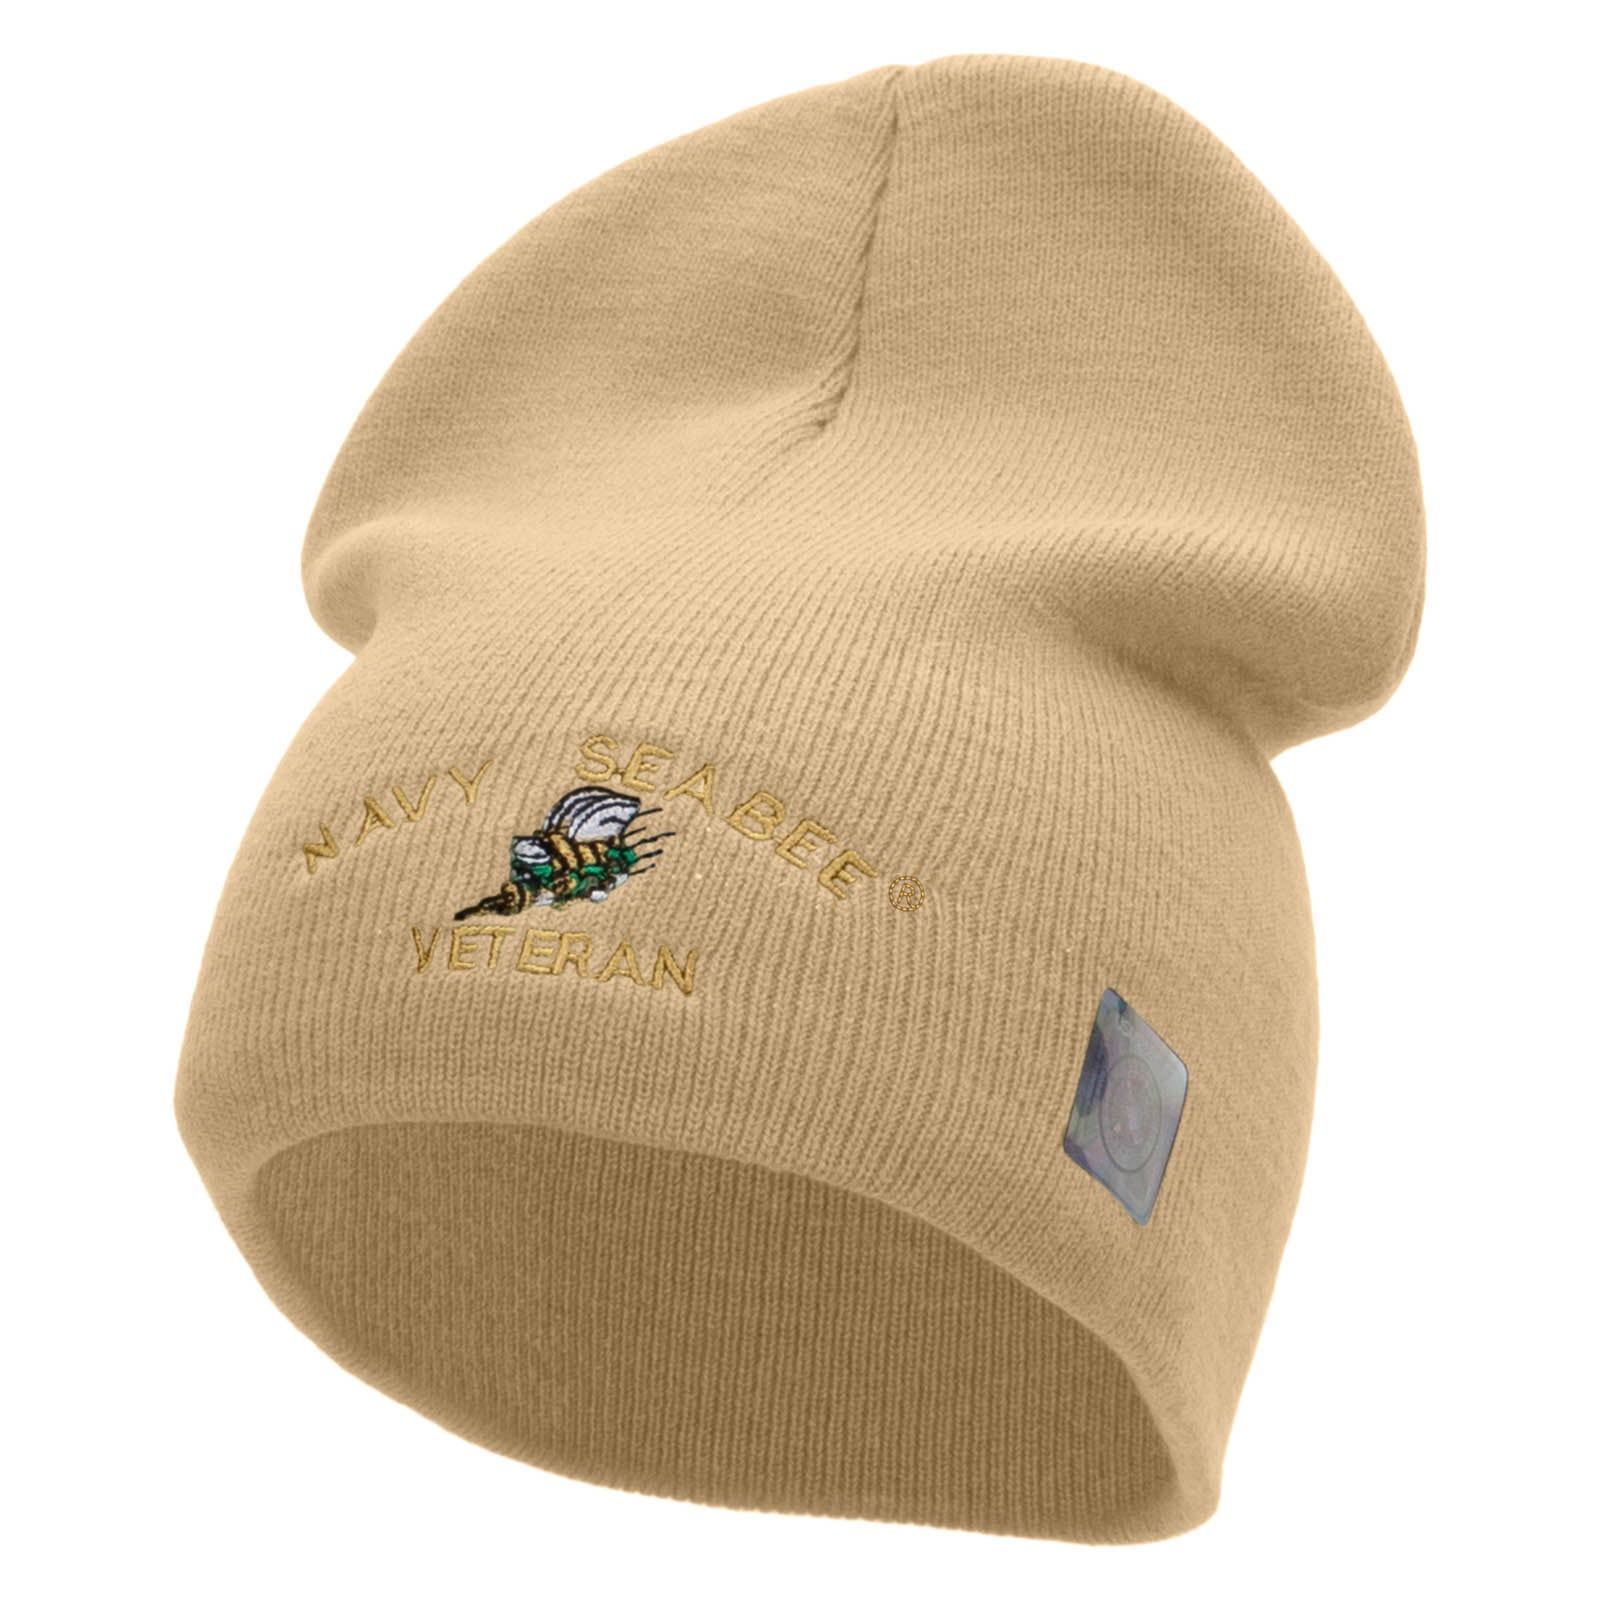 Licensed Navy Seabee Veteran Embroidered Short Beanie Made in USA - Stone OSFM